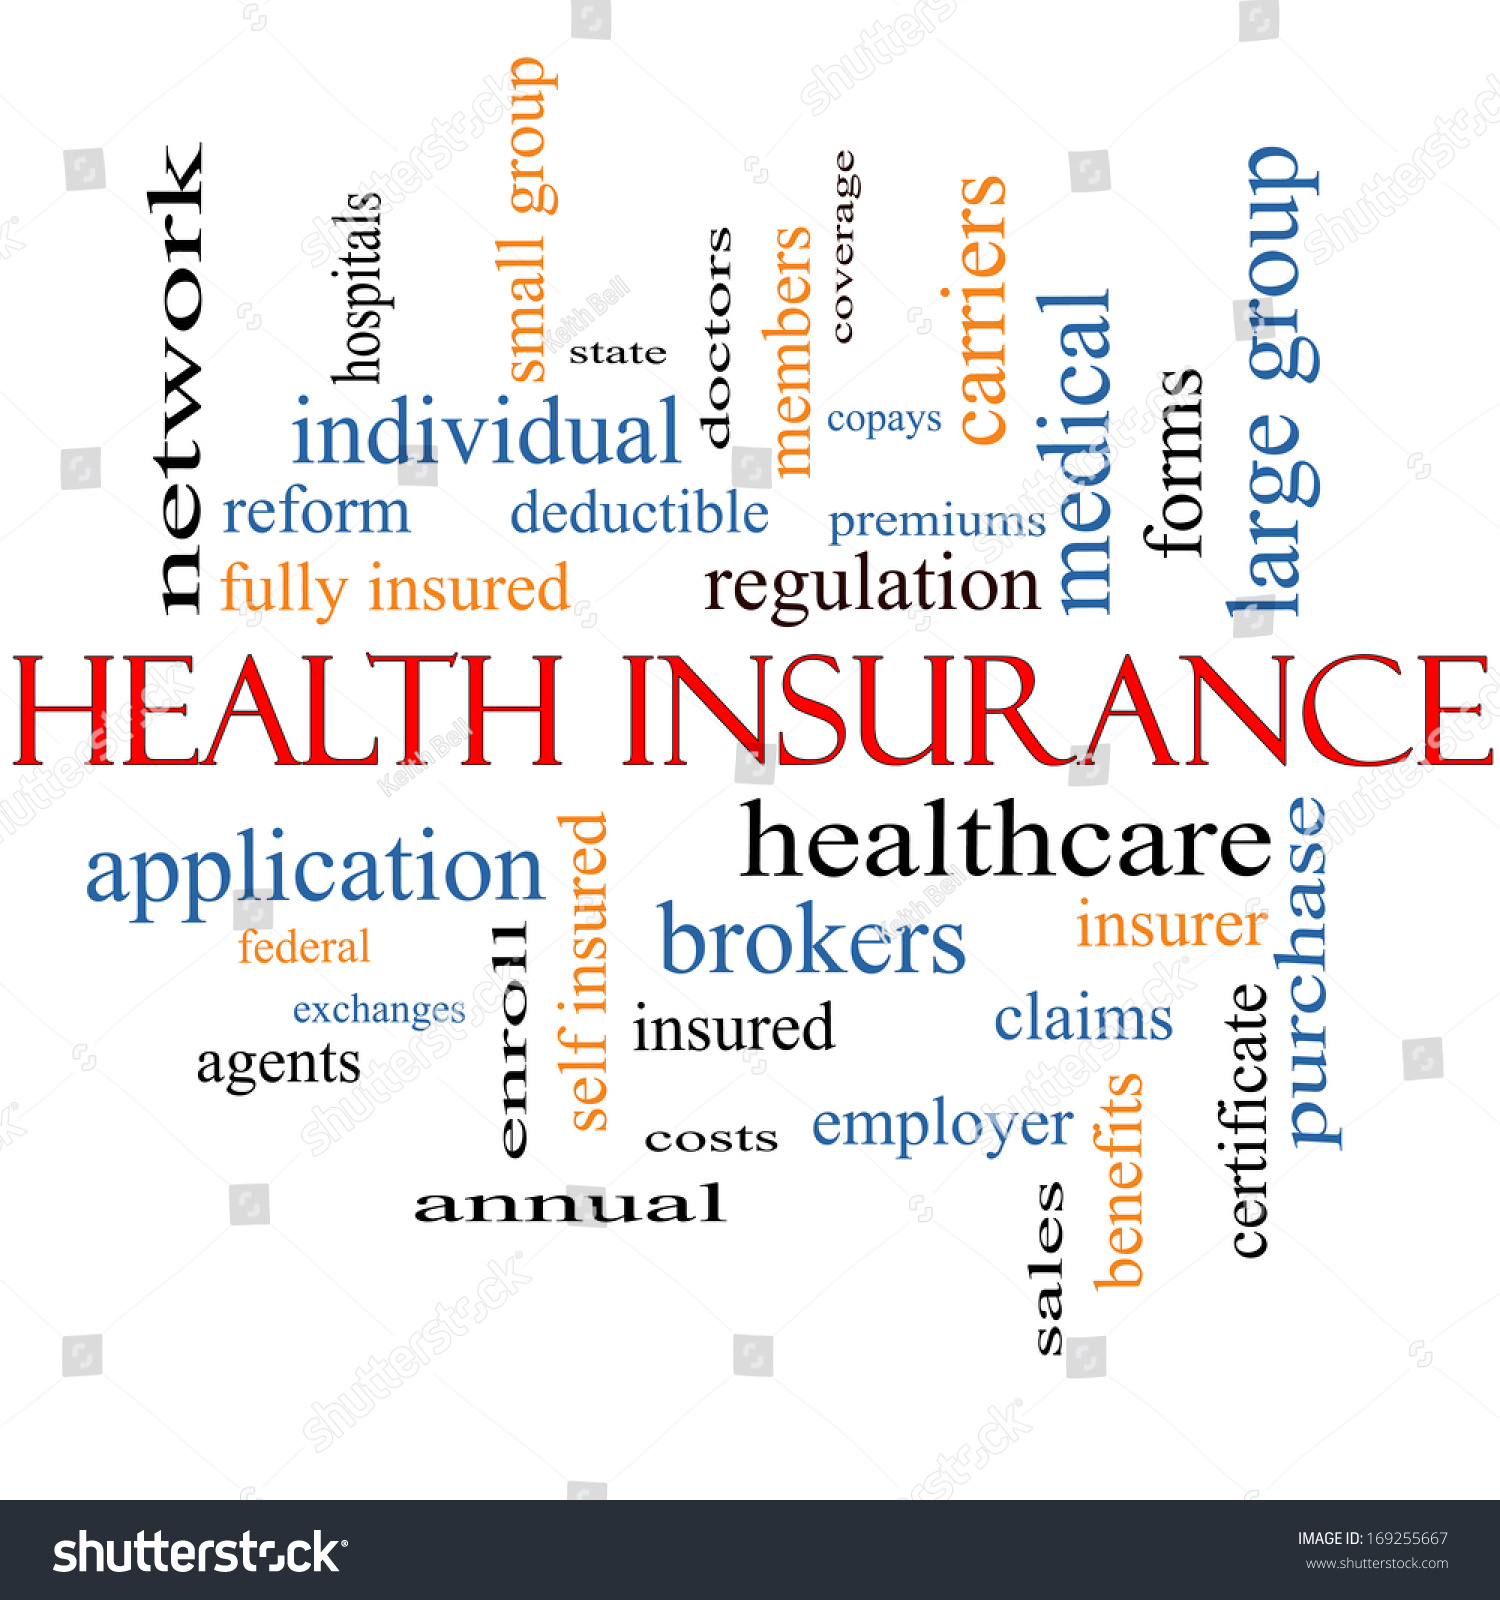 Insurance word tags stock illustration. Image of personal ...